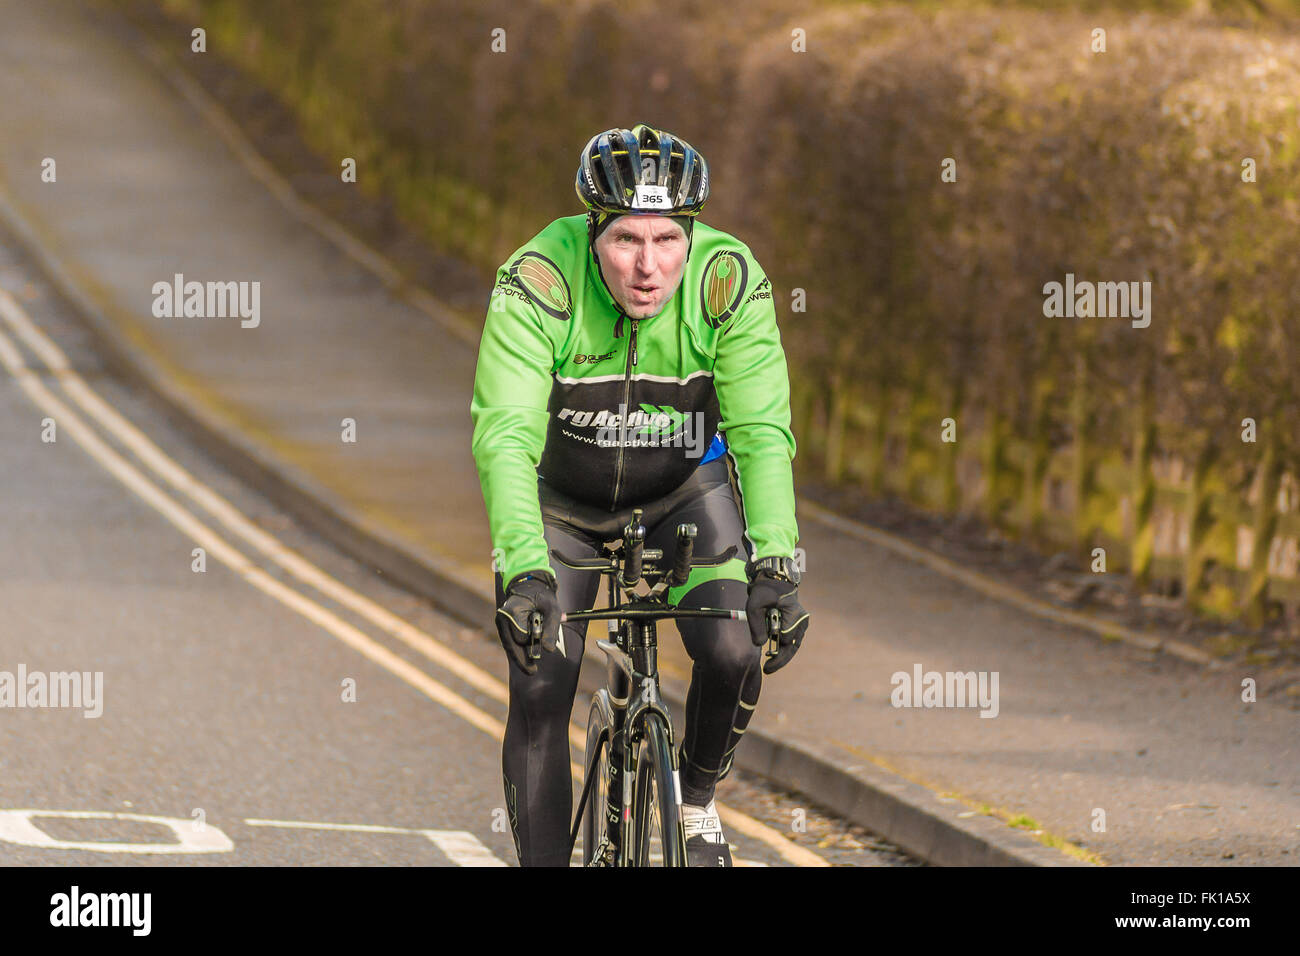 Whitwell, Rutland, UK. 5th March 2016. Cyclists competing in the 'Bike' section of the Dambuster Duathlon, a qualification event for the Duathlon World Championships 2016 Credit:  Jim Harrison/Alamy Live News Stock Photo